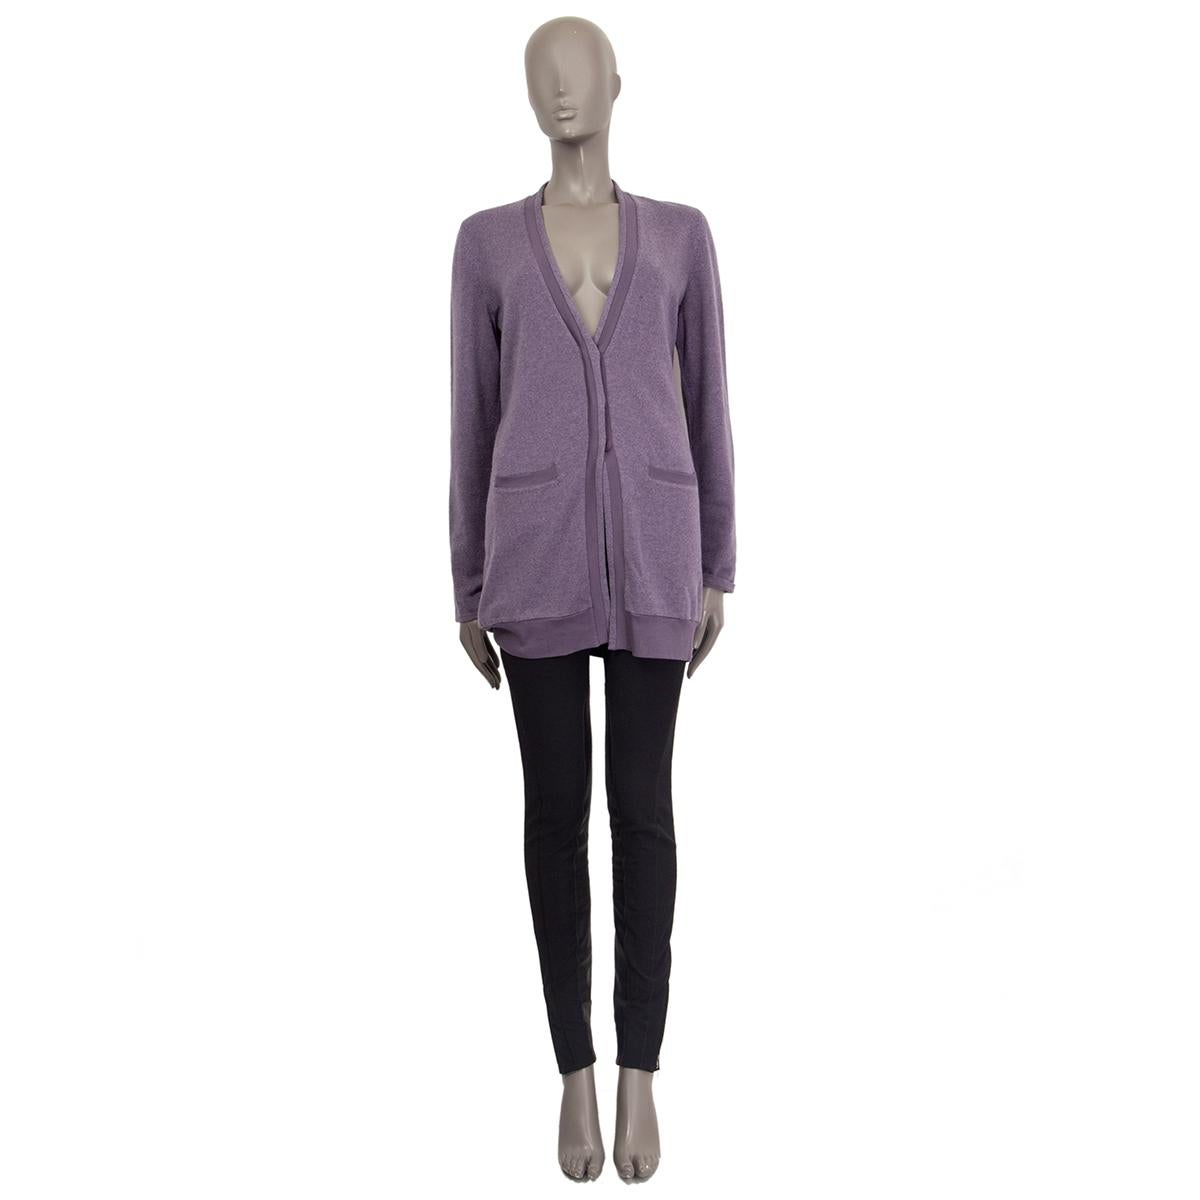 100% authentic Brunello Cucinelli long-cut cardigan in smokey purple cashmere (100%) with detail in rib. Adjustable canvas belt in the back. Has been carried and is in excellent condition.

Measurements
Tag Size	L
Size	L
Shoulder Width	37cm